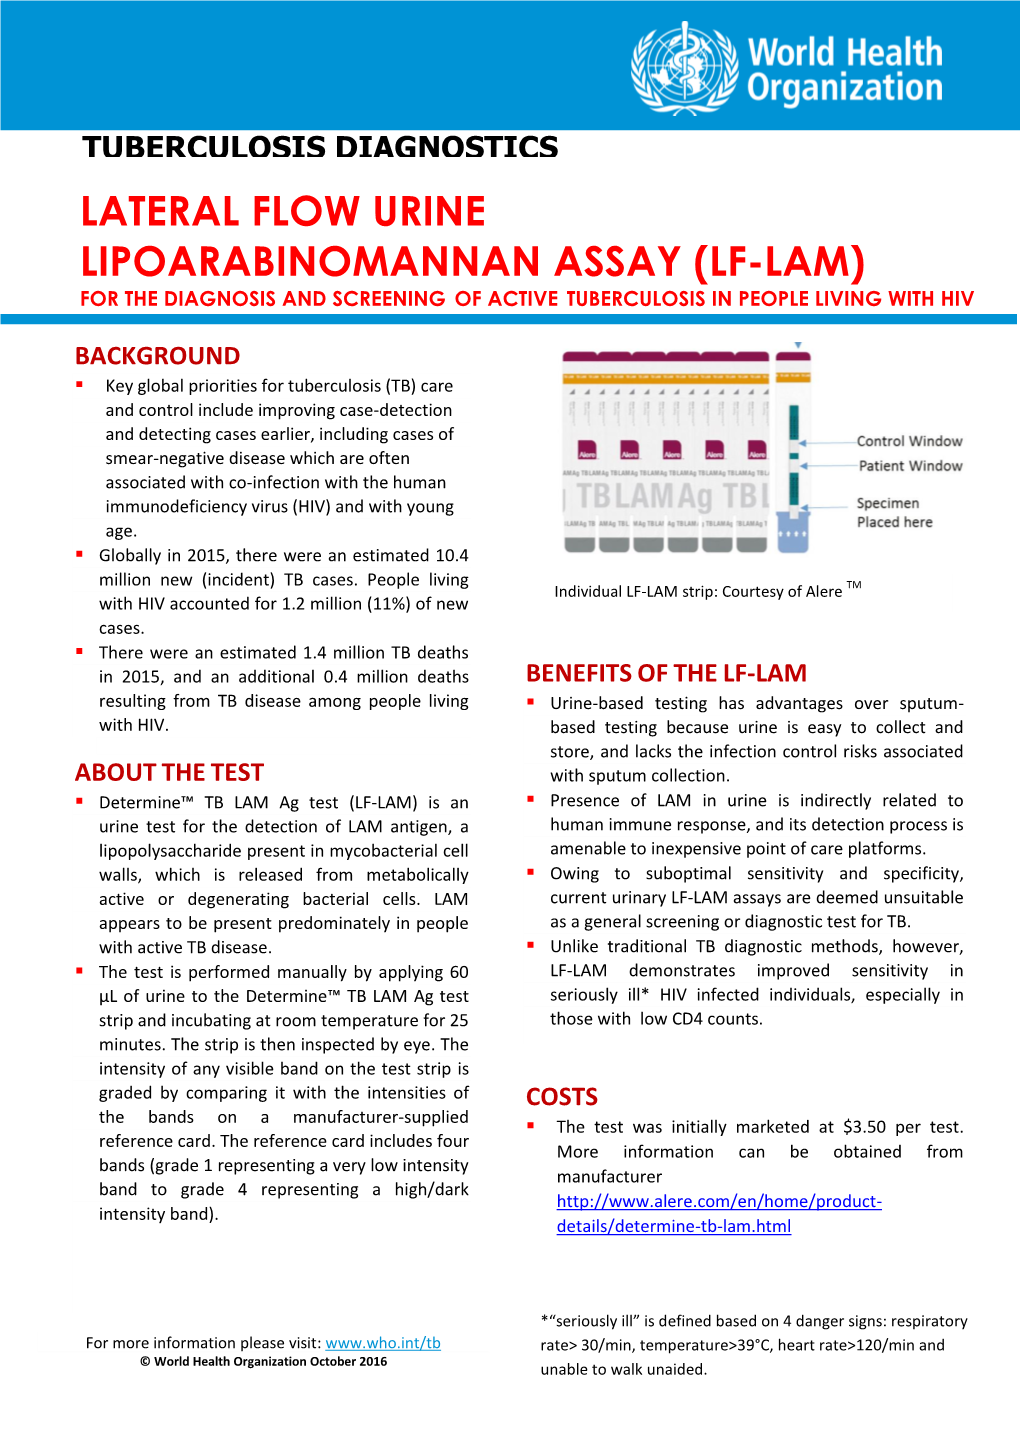 Lf-Lam) for the Diagnosis and Screening of Active Tuberculosis in People Living with Hiv